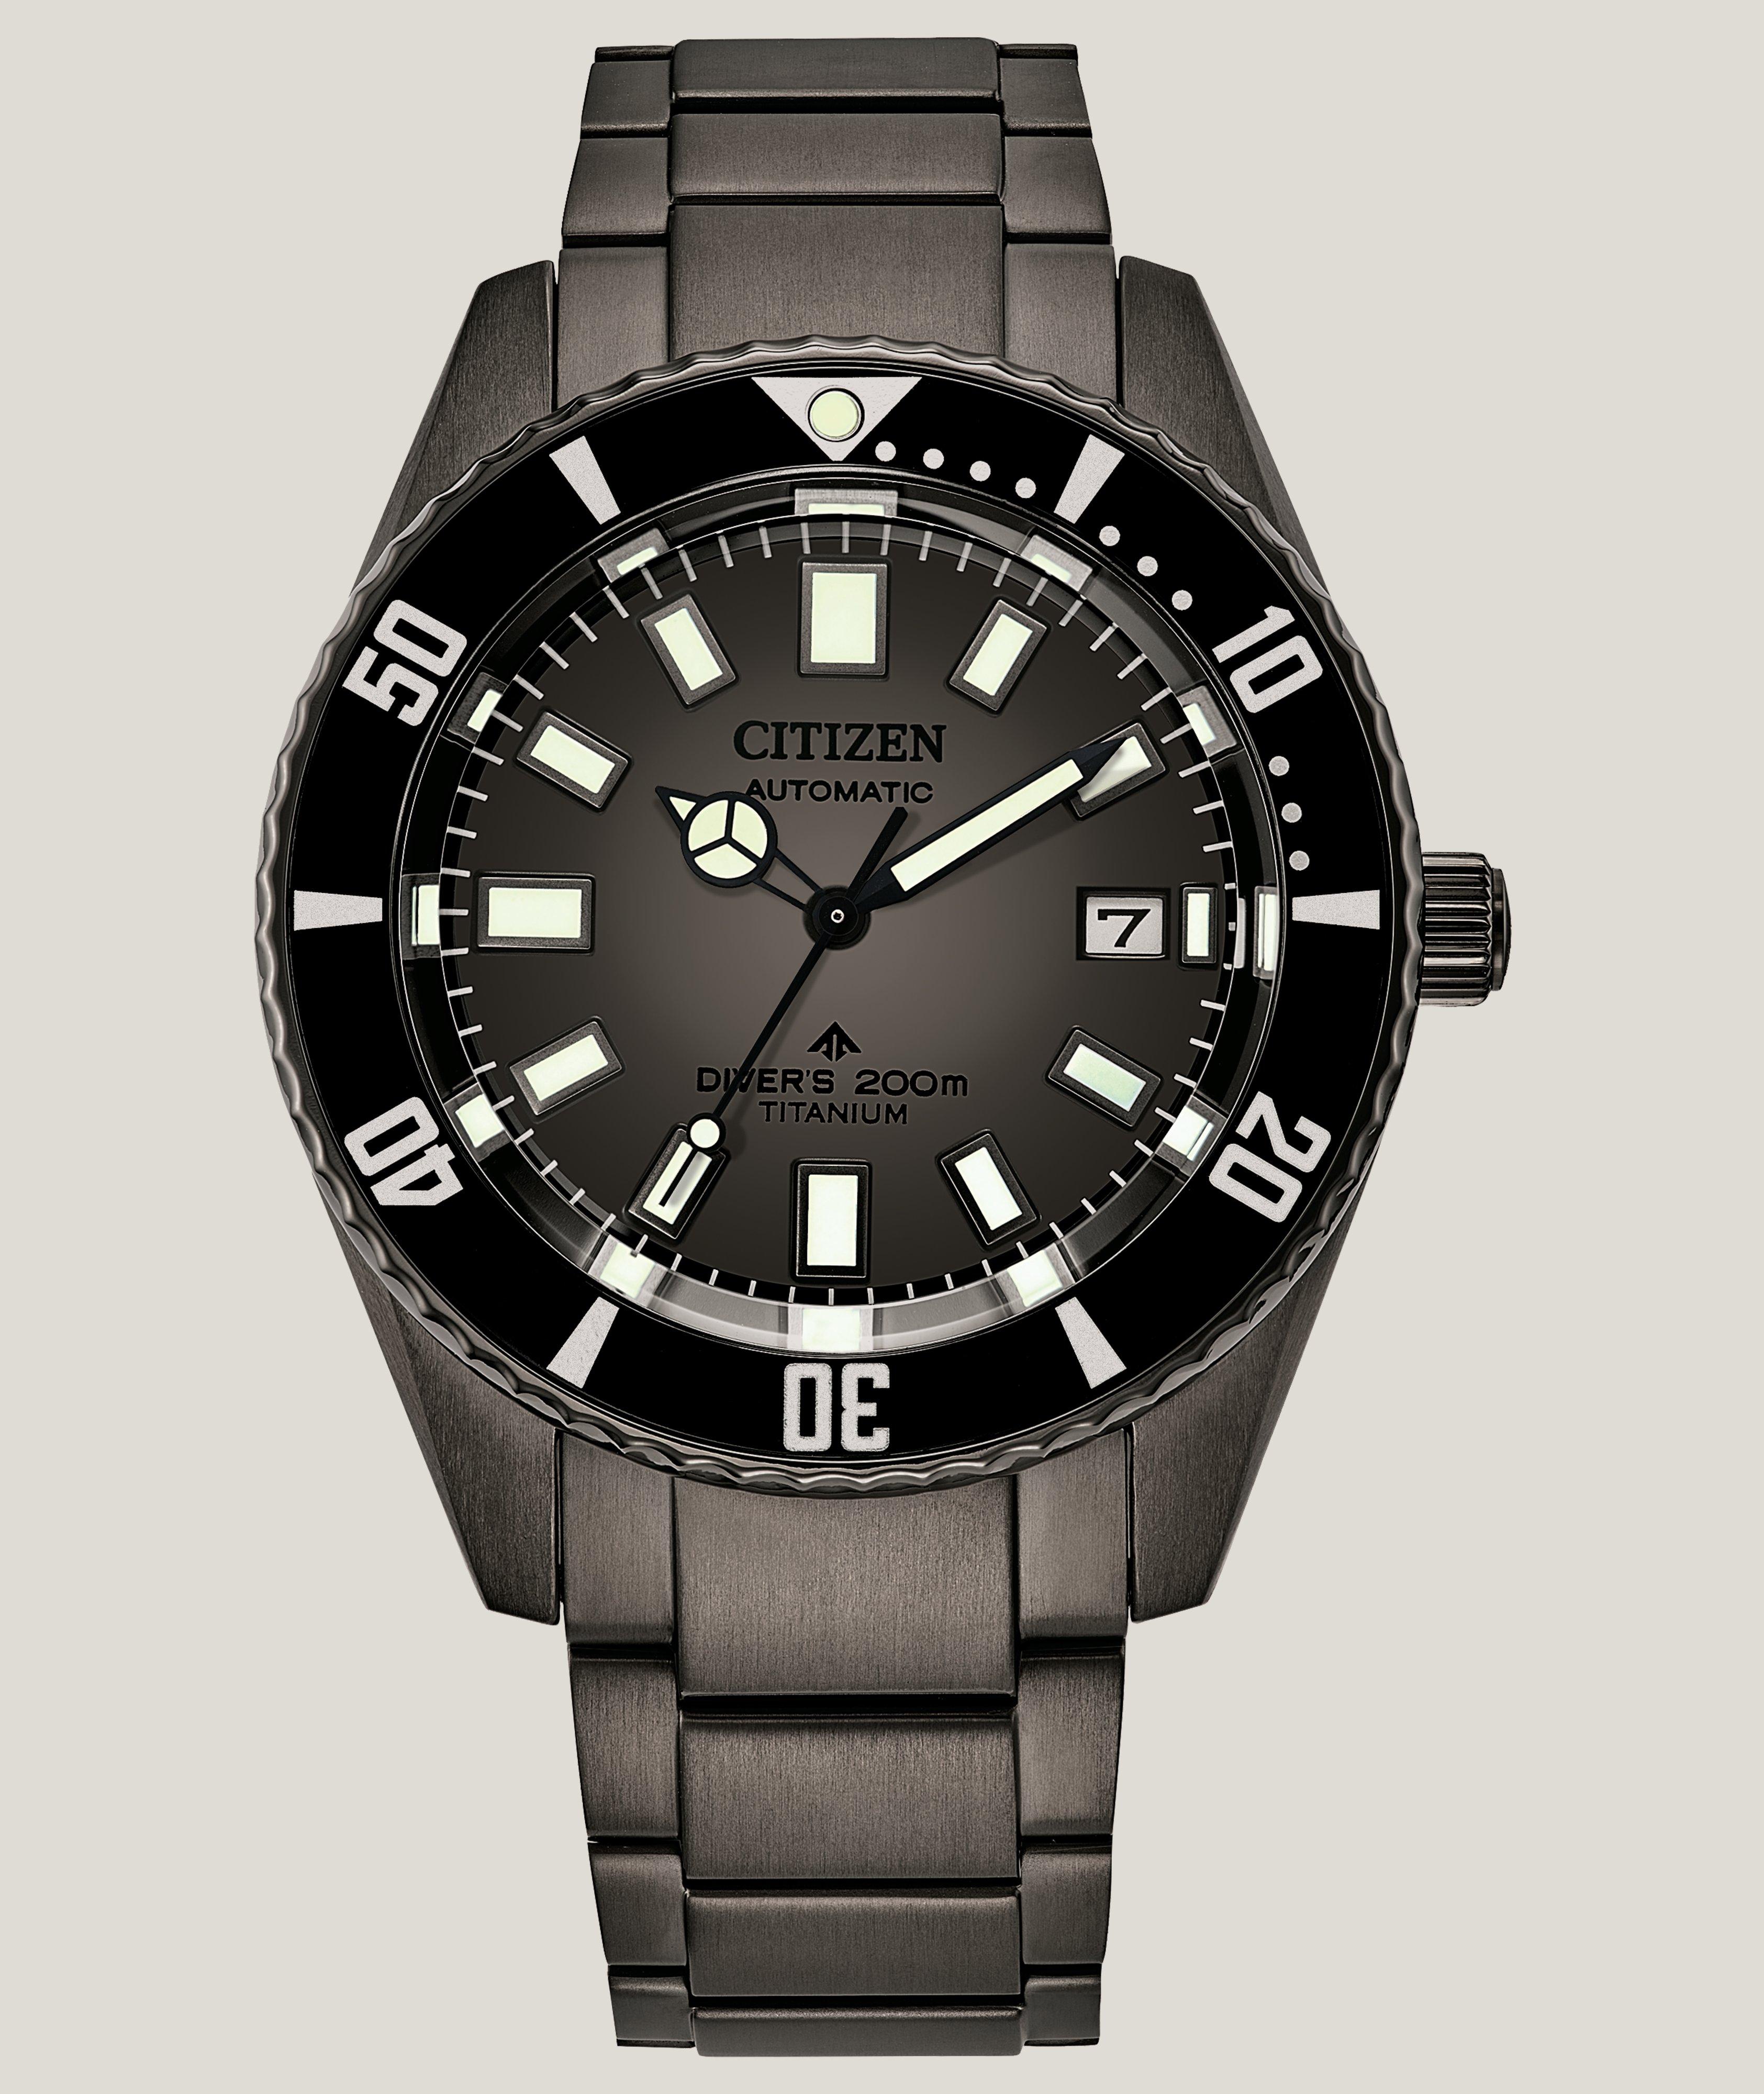 Promaster Dive Watch image 0